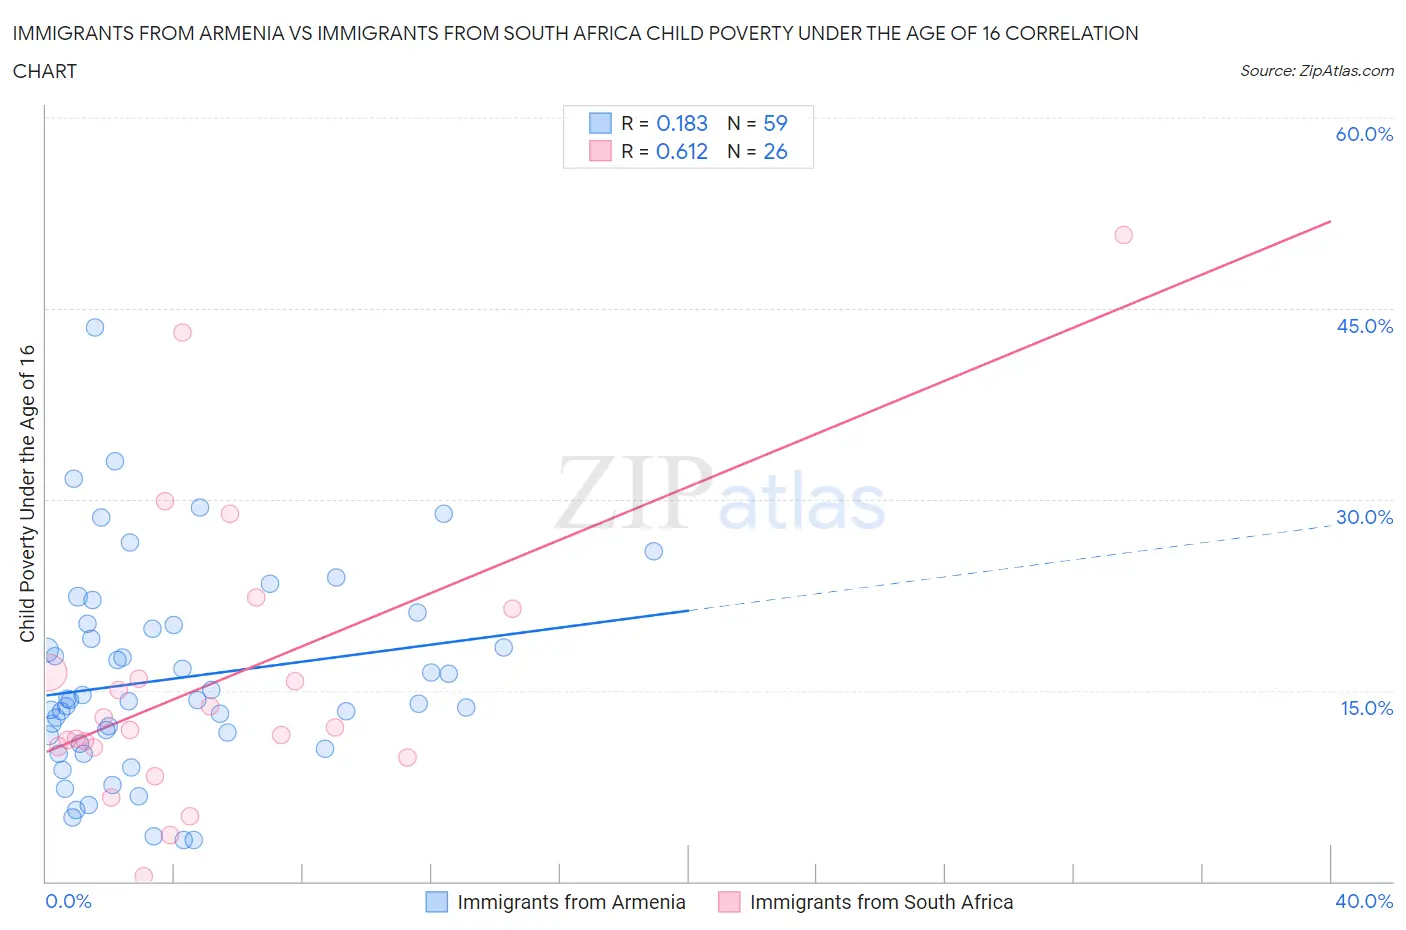 Immigrants from Armenia vs Immigrants from South Africa Child Poverty Under the Age of 16